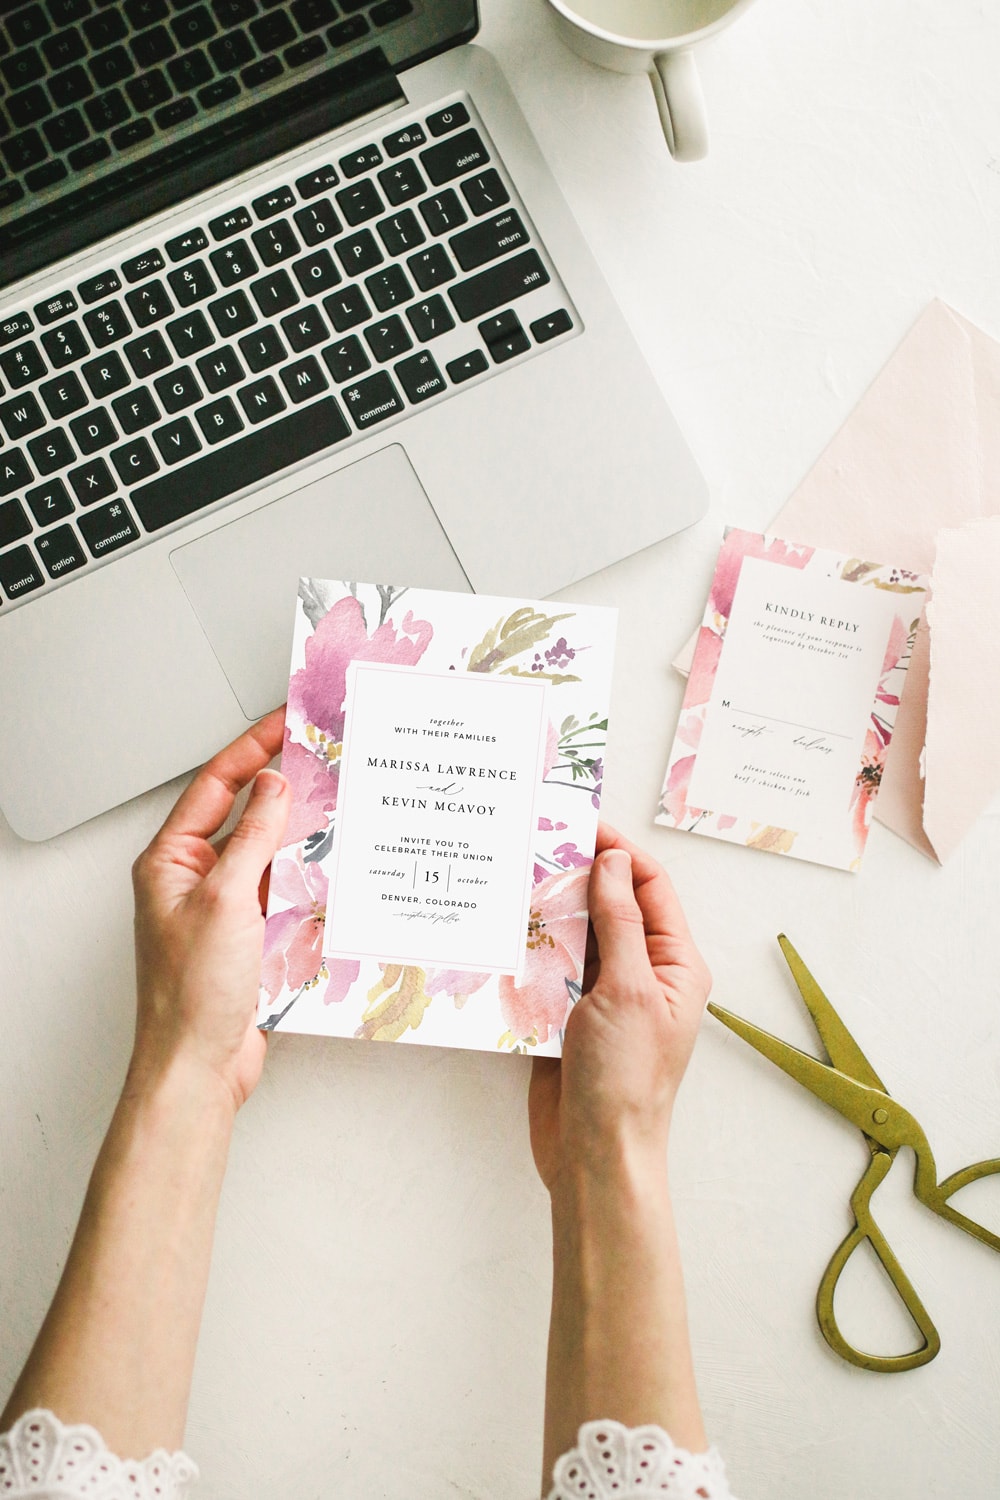 How to make wedding invitations on a tiny budget: how I made my own wedding invites for less than $50 (total!)